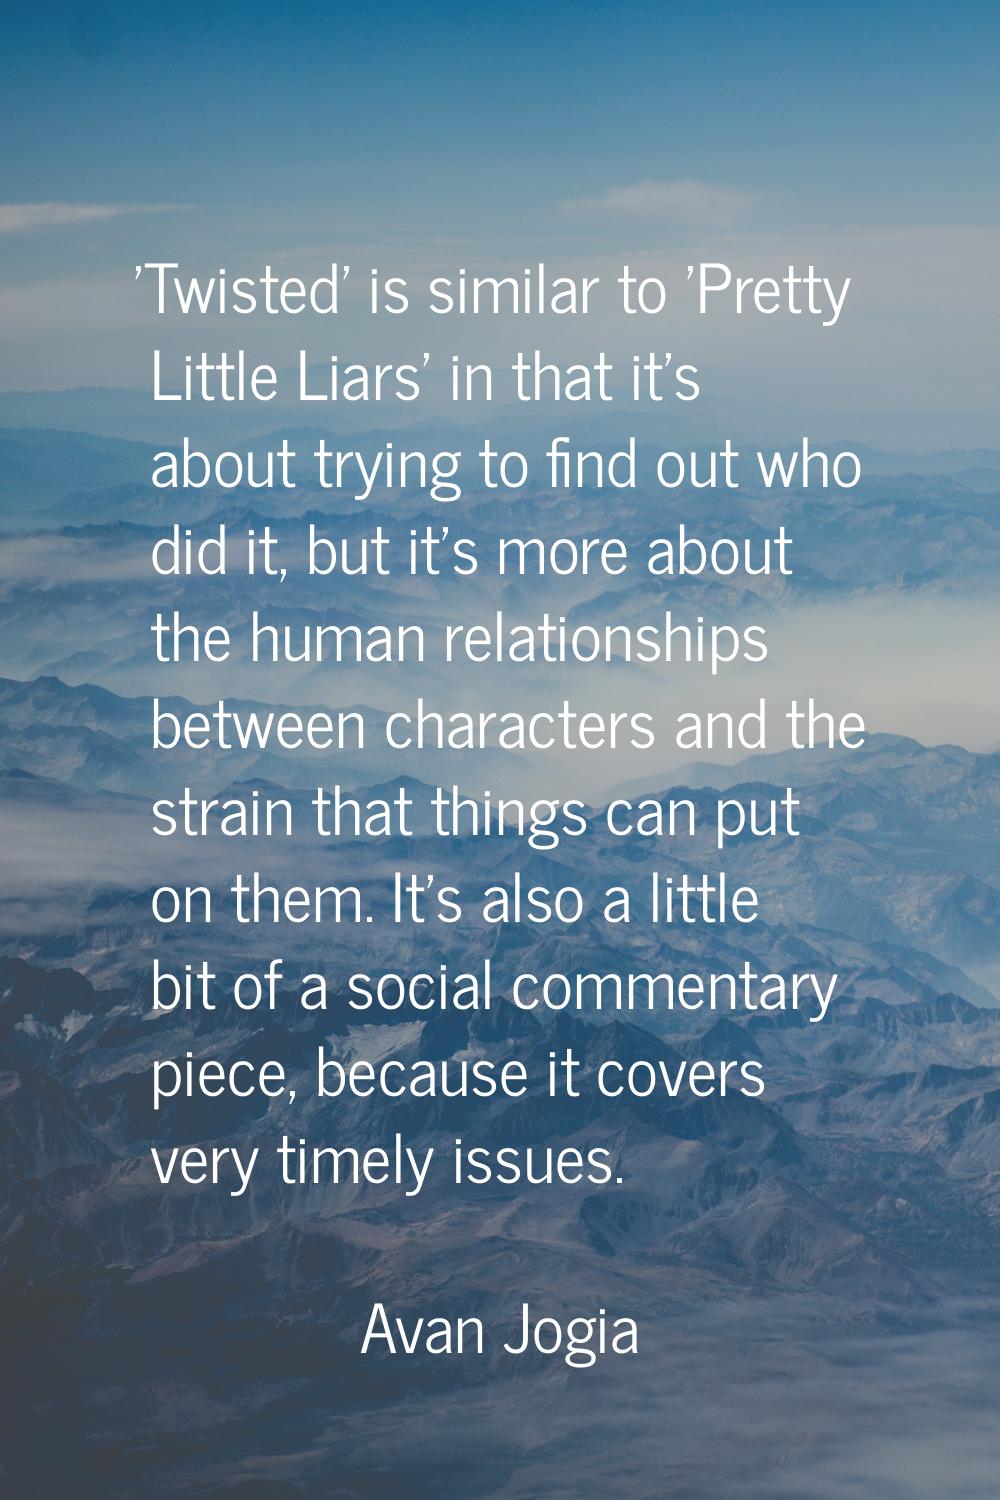 'Twisted' is similar to 'Pretty Little Liars' in that it's about trying to find out who did it, but